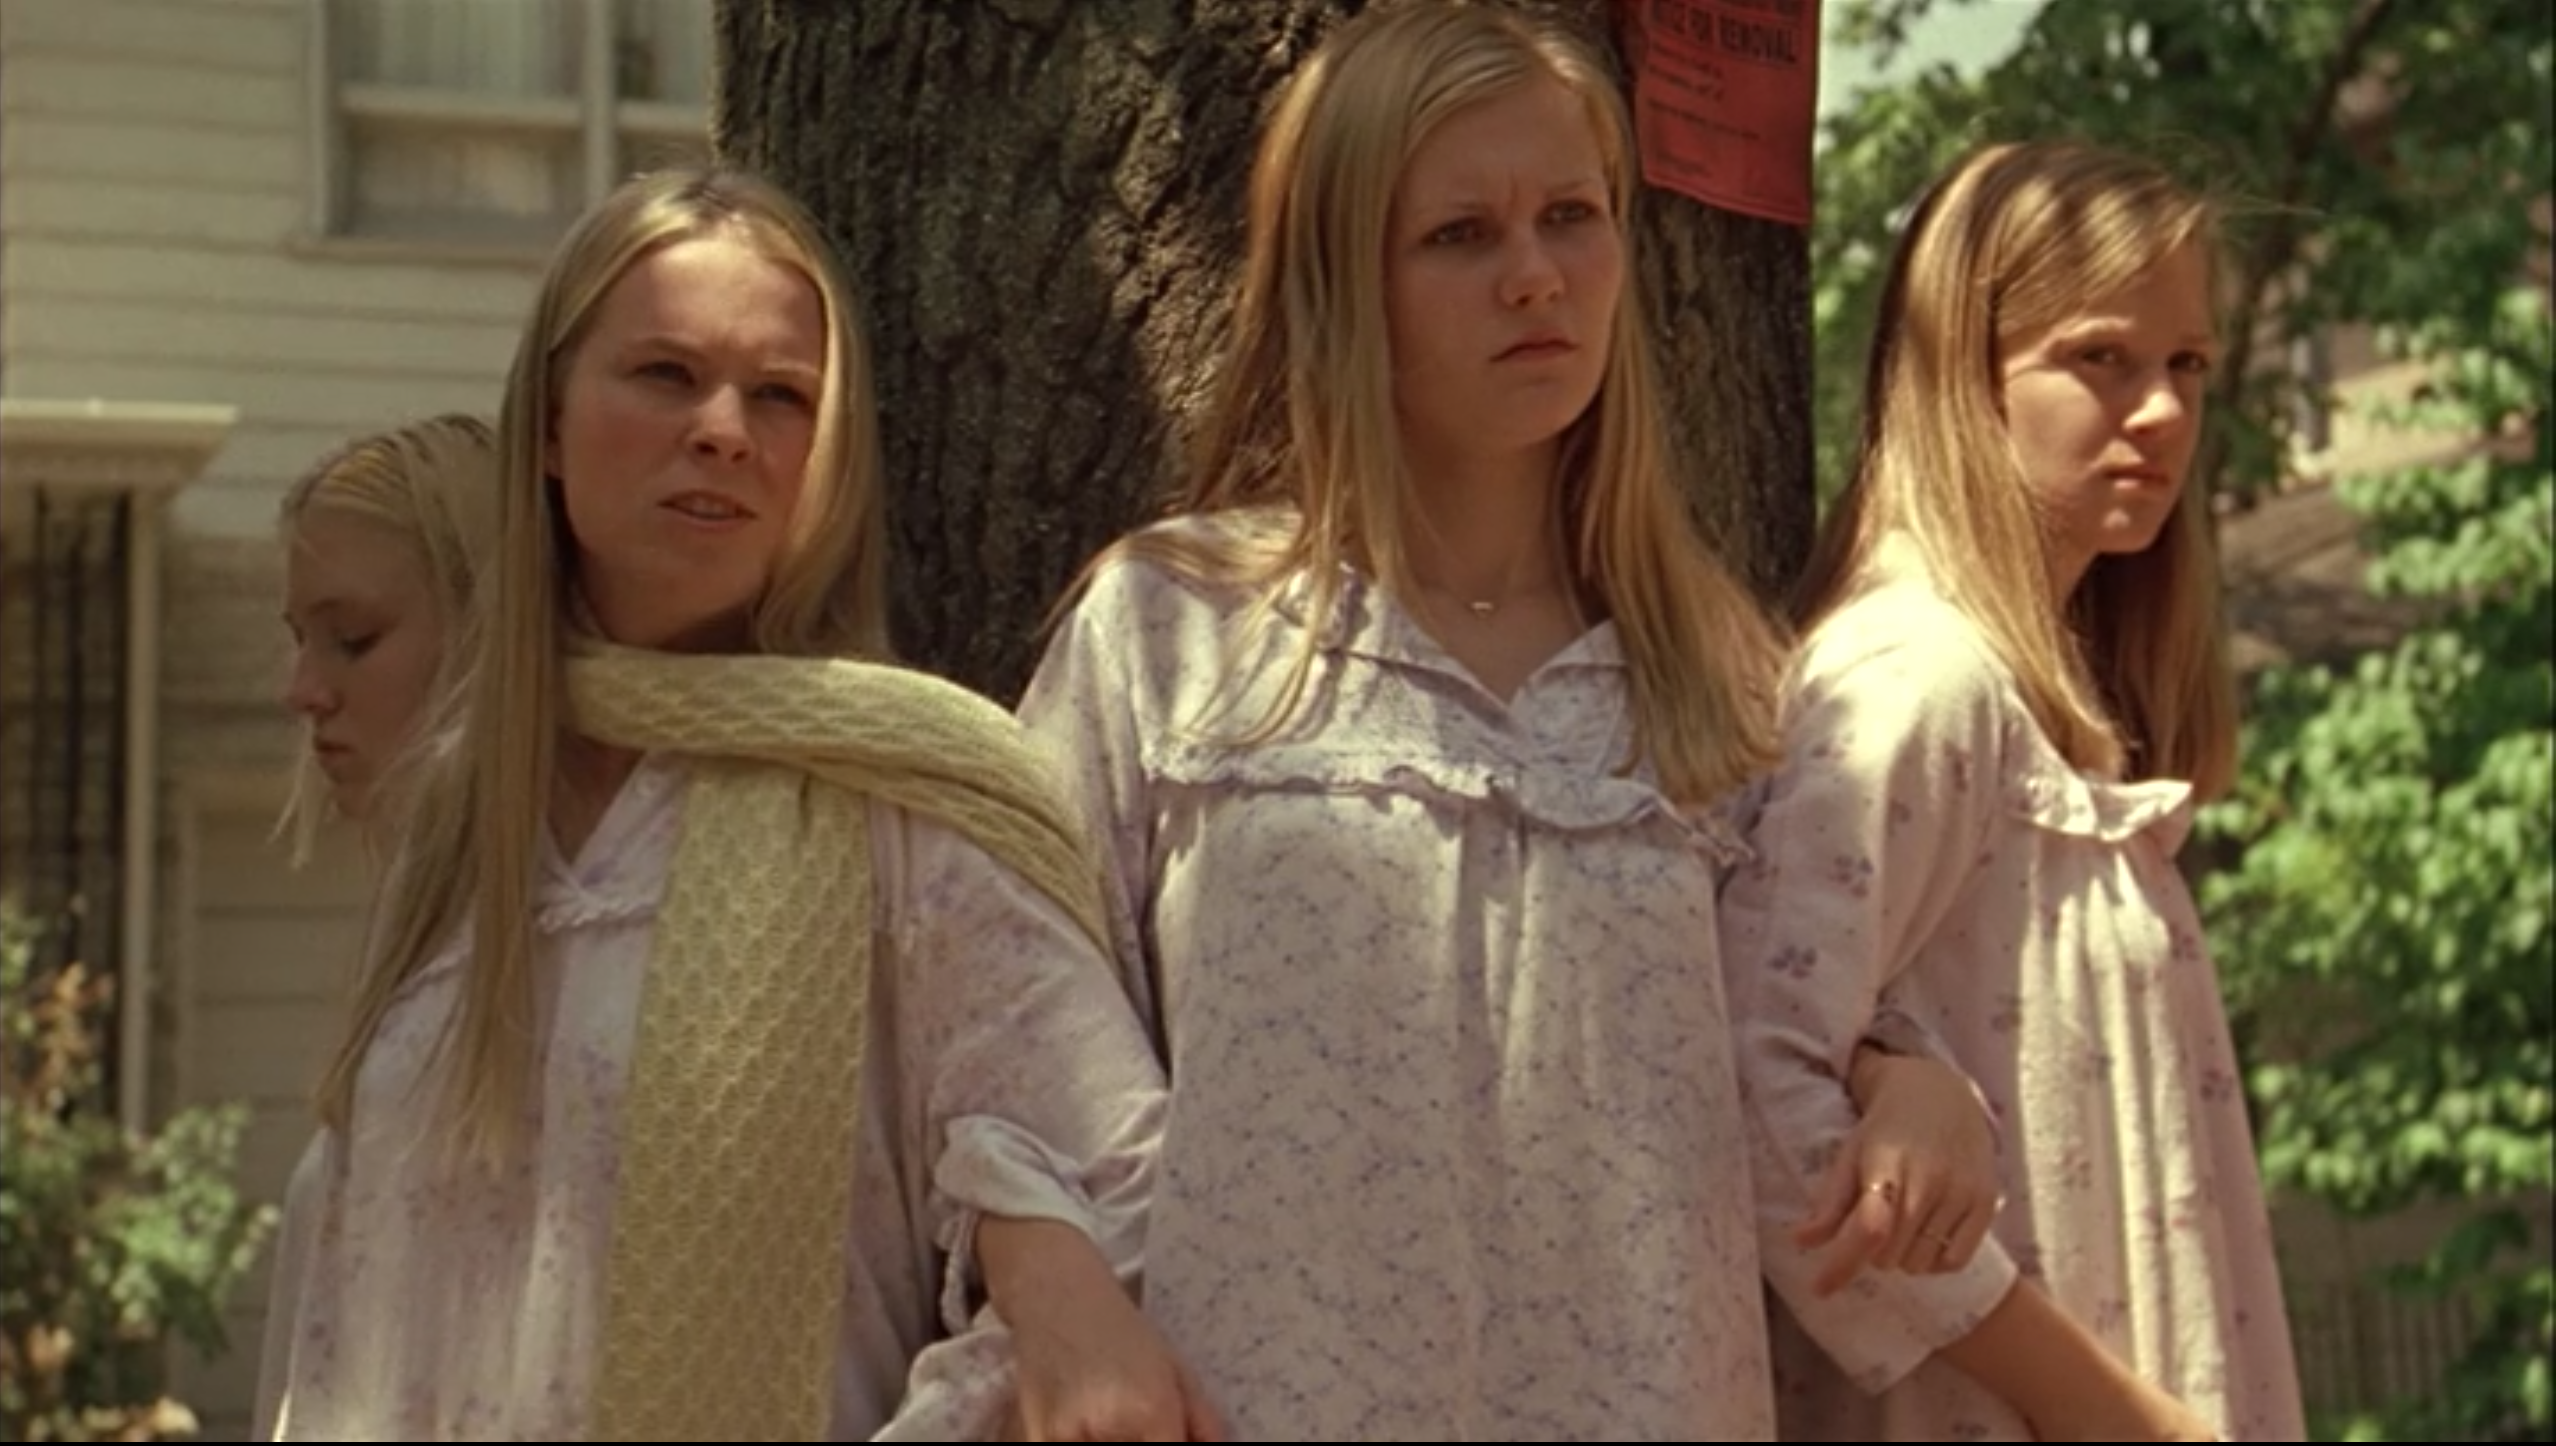 The Lisbon sisters, linked arm-in-arm, around a tree in &quot;The Virgin Suicides.&quot; 